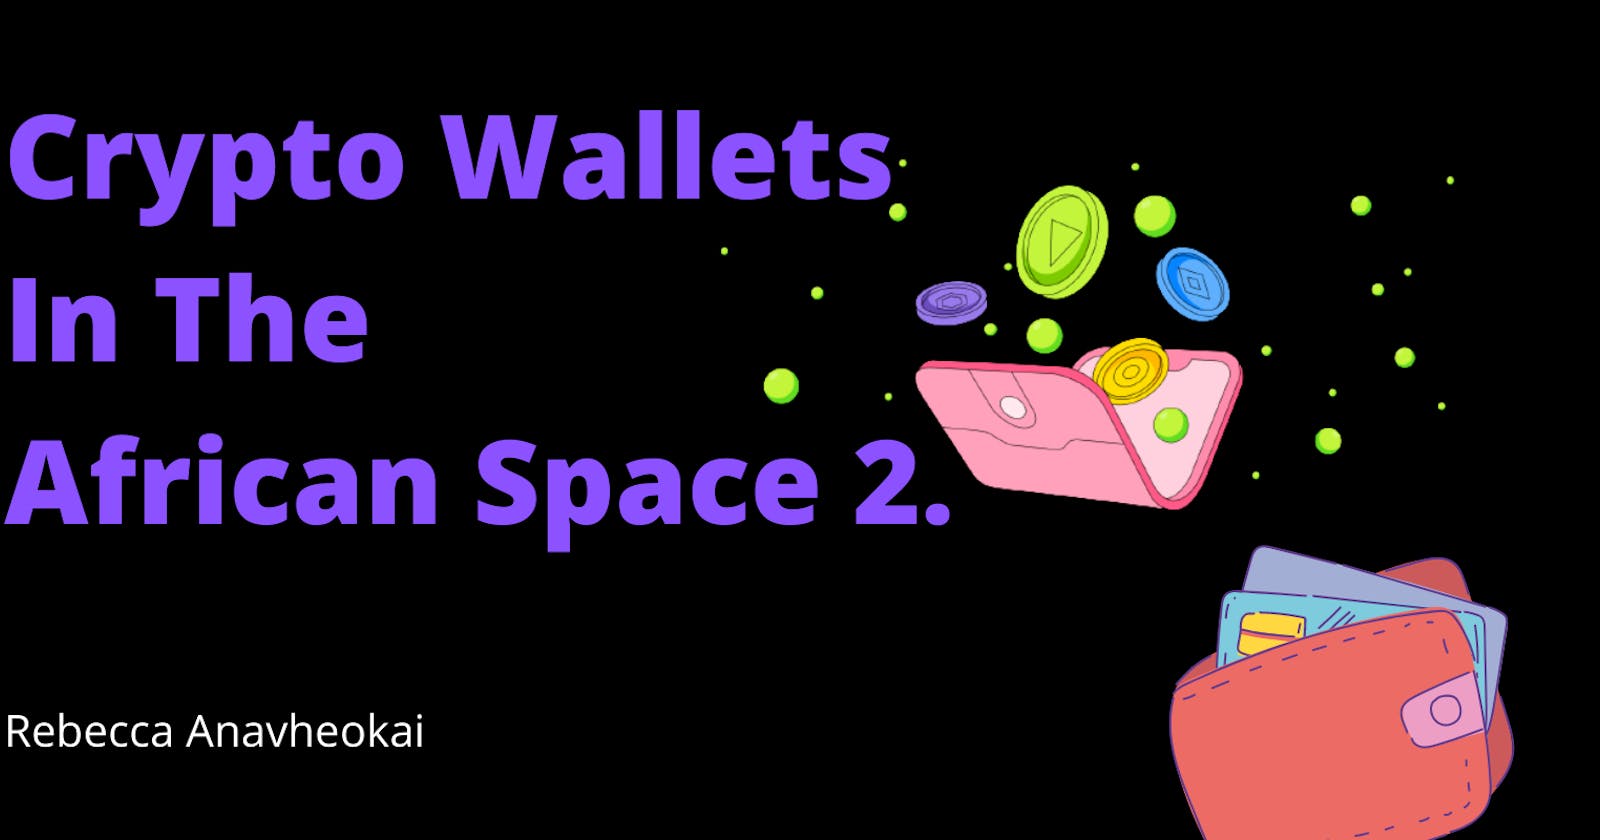 Crypto Wallets In The African Space 2.